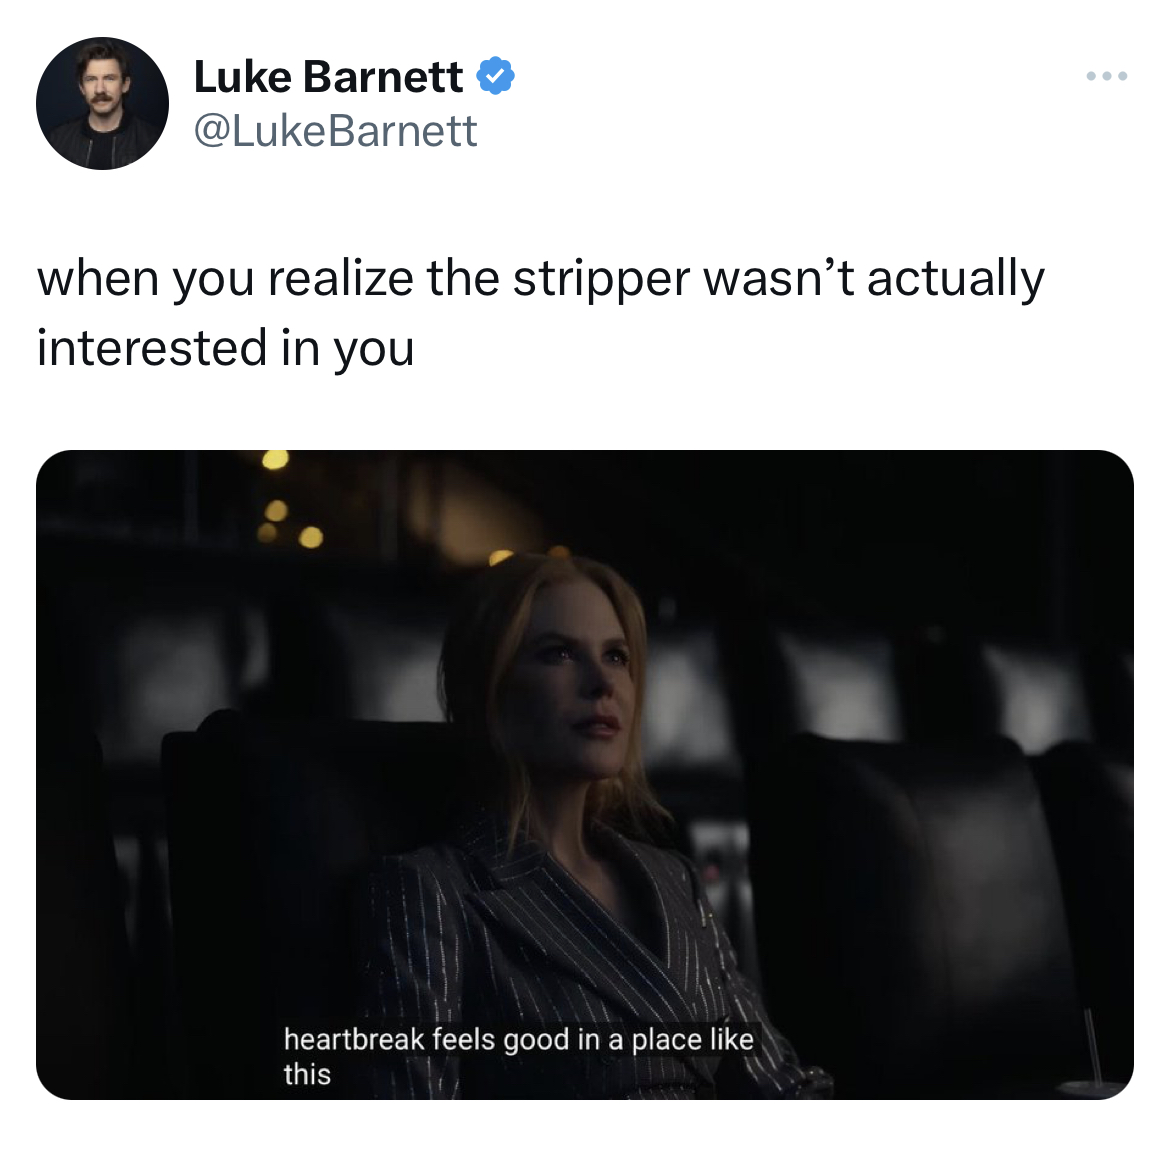 savage tweets - communication - 8 Luke Barnett when you realize the stripper wasn't actually interested in you heartbreak feels good in a place this